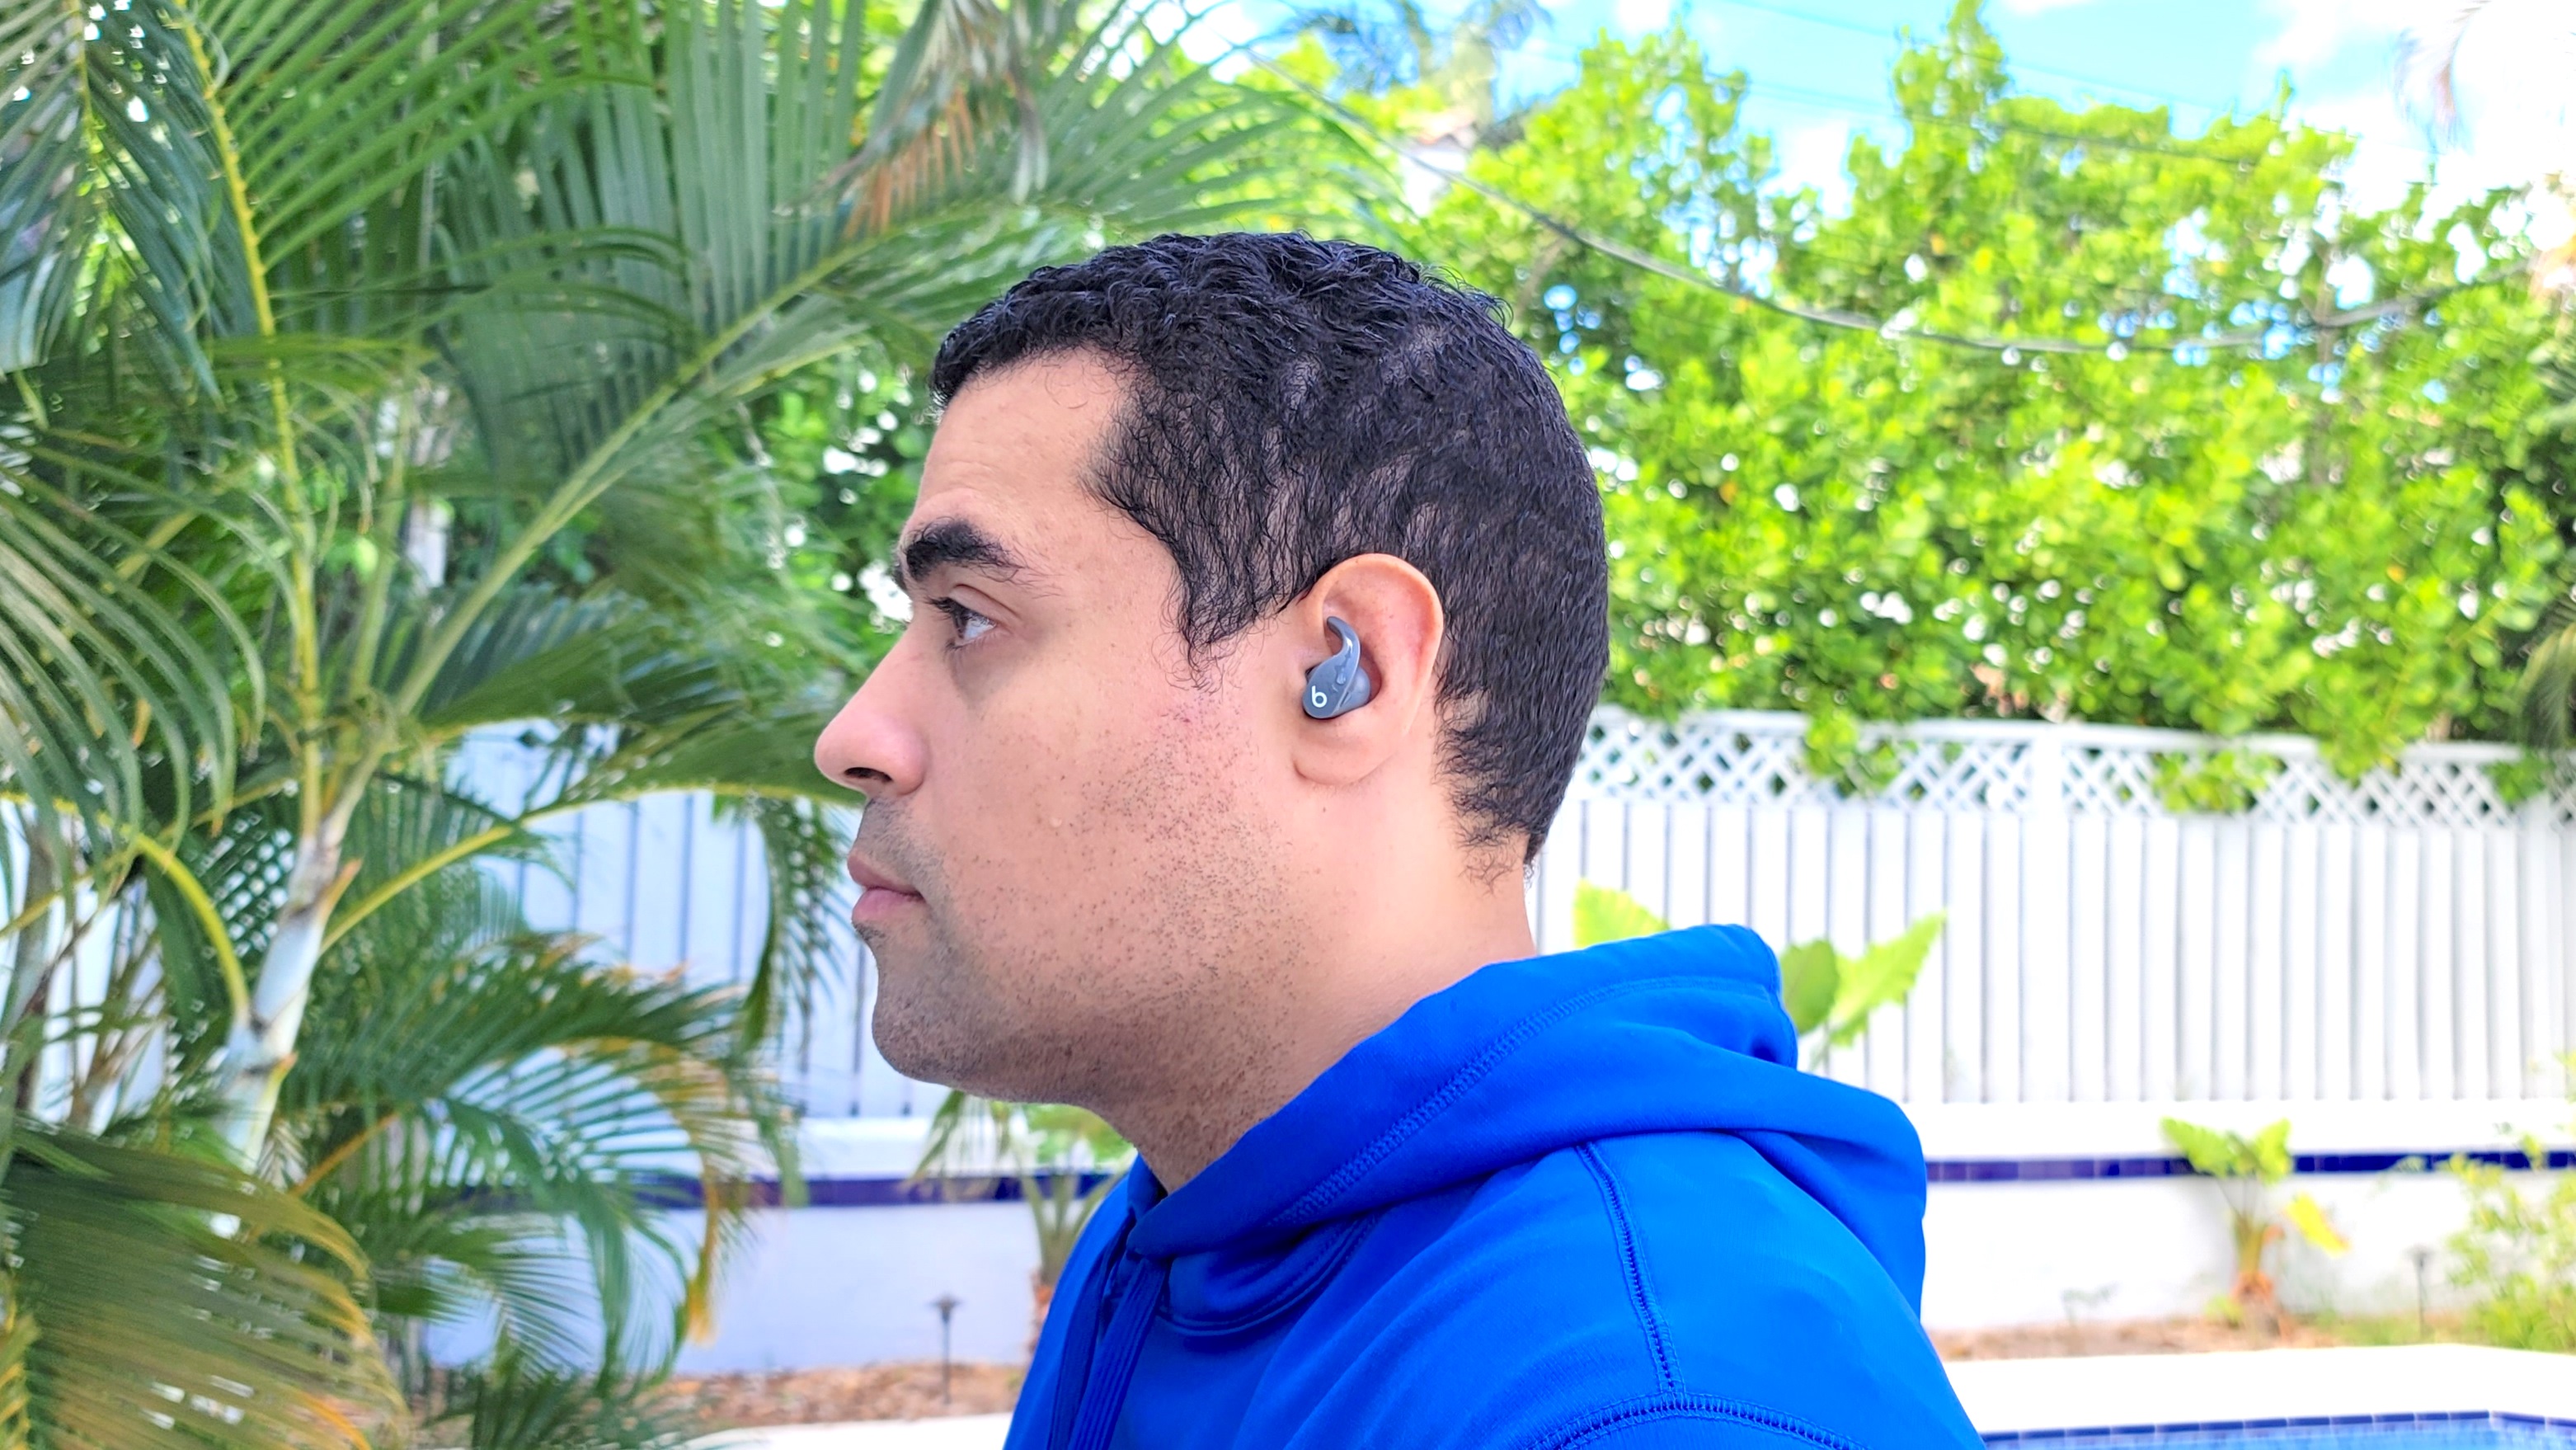 I bought the Beats Fit Pro — and I actually like them better than